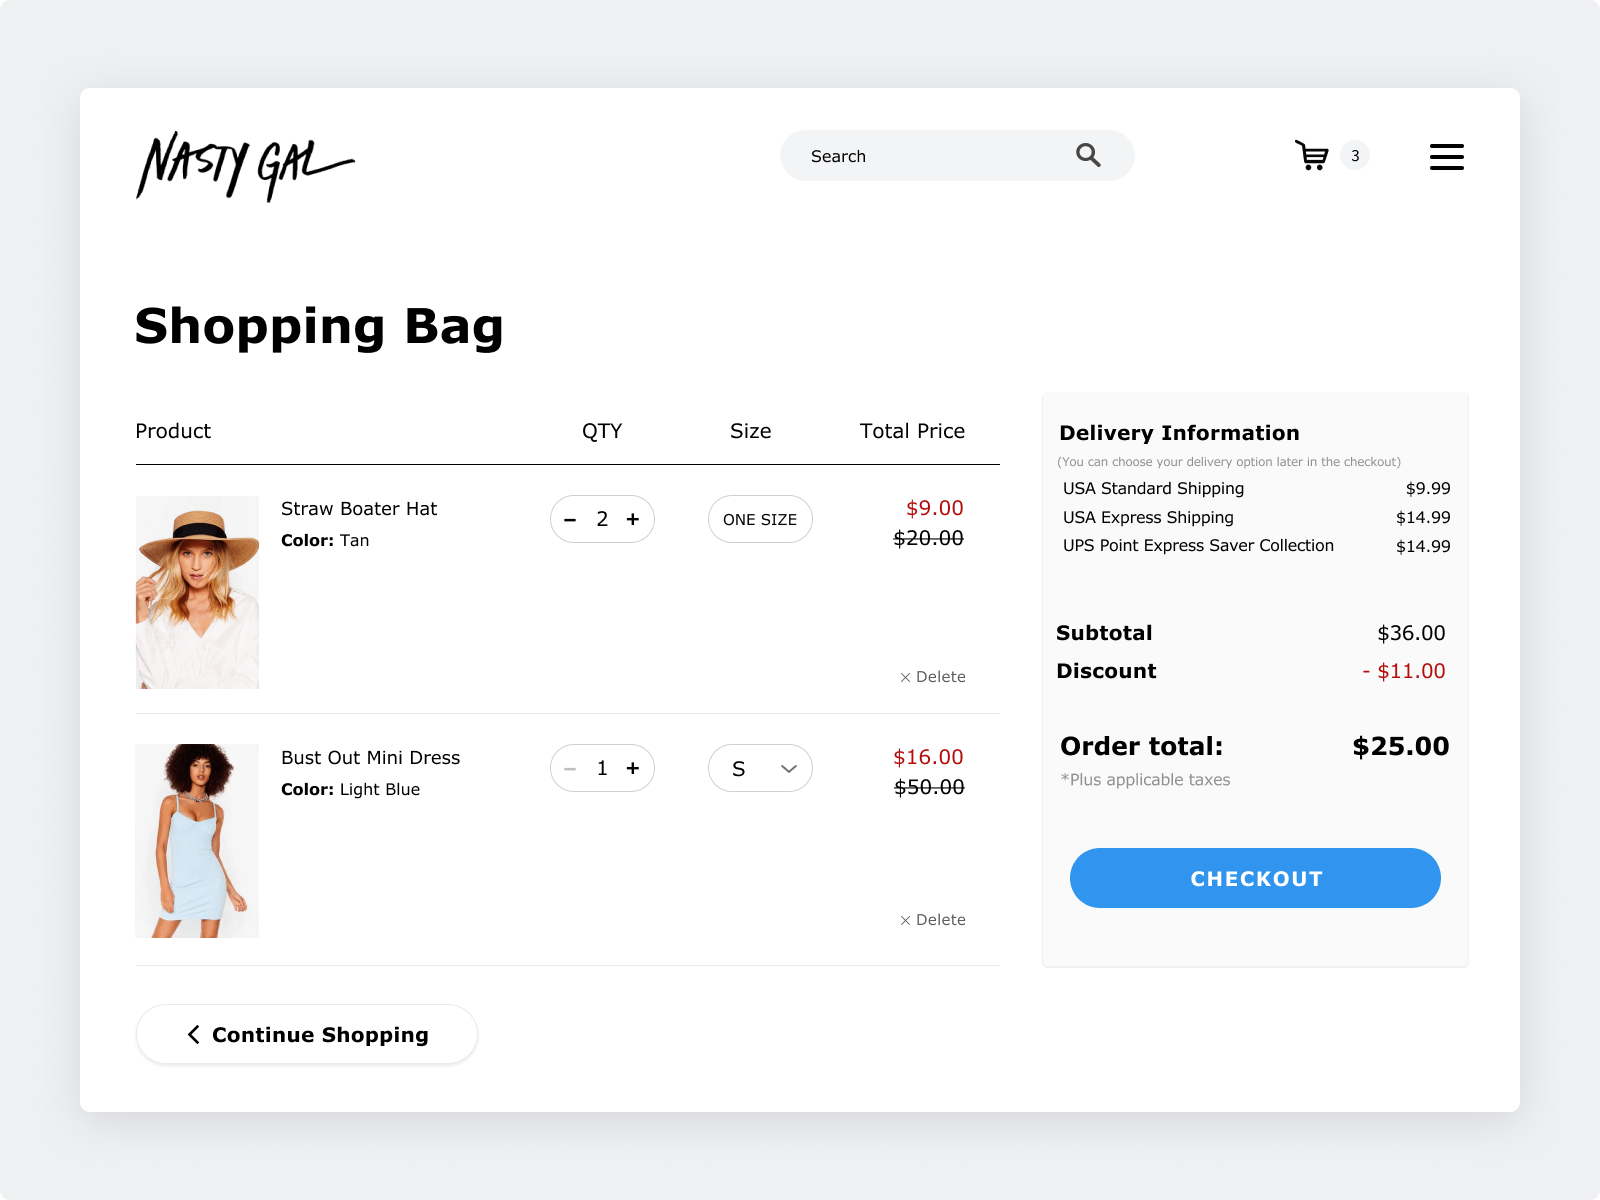 Credit Card Checkout. Daily Ui 002 creditcard creditcardcheckout daily ui design minimal minimalism new payment shopping cart ui uiuxdesign web ecommerce